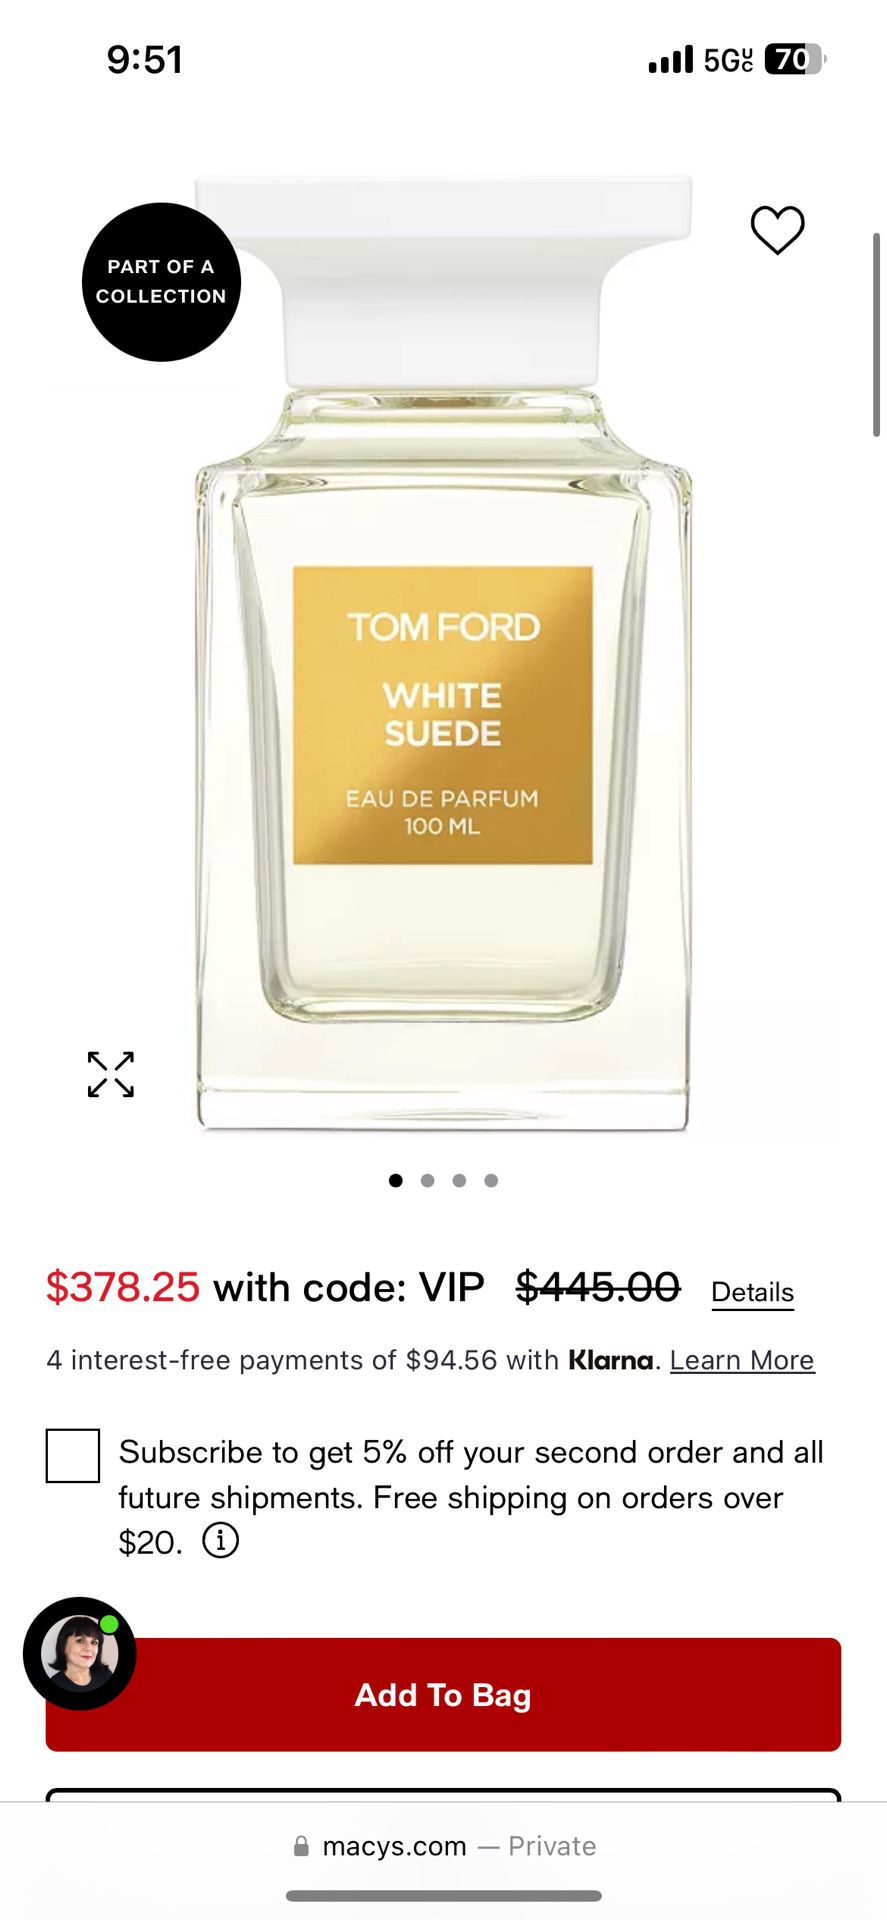 Tom Ford White Suede 